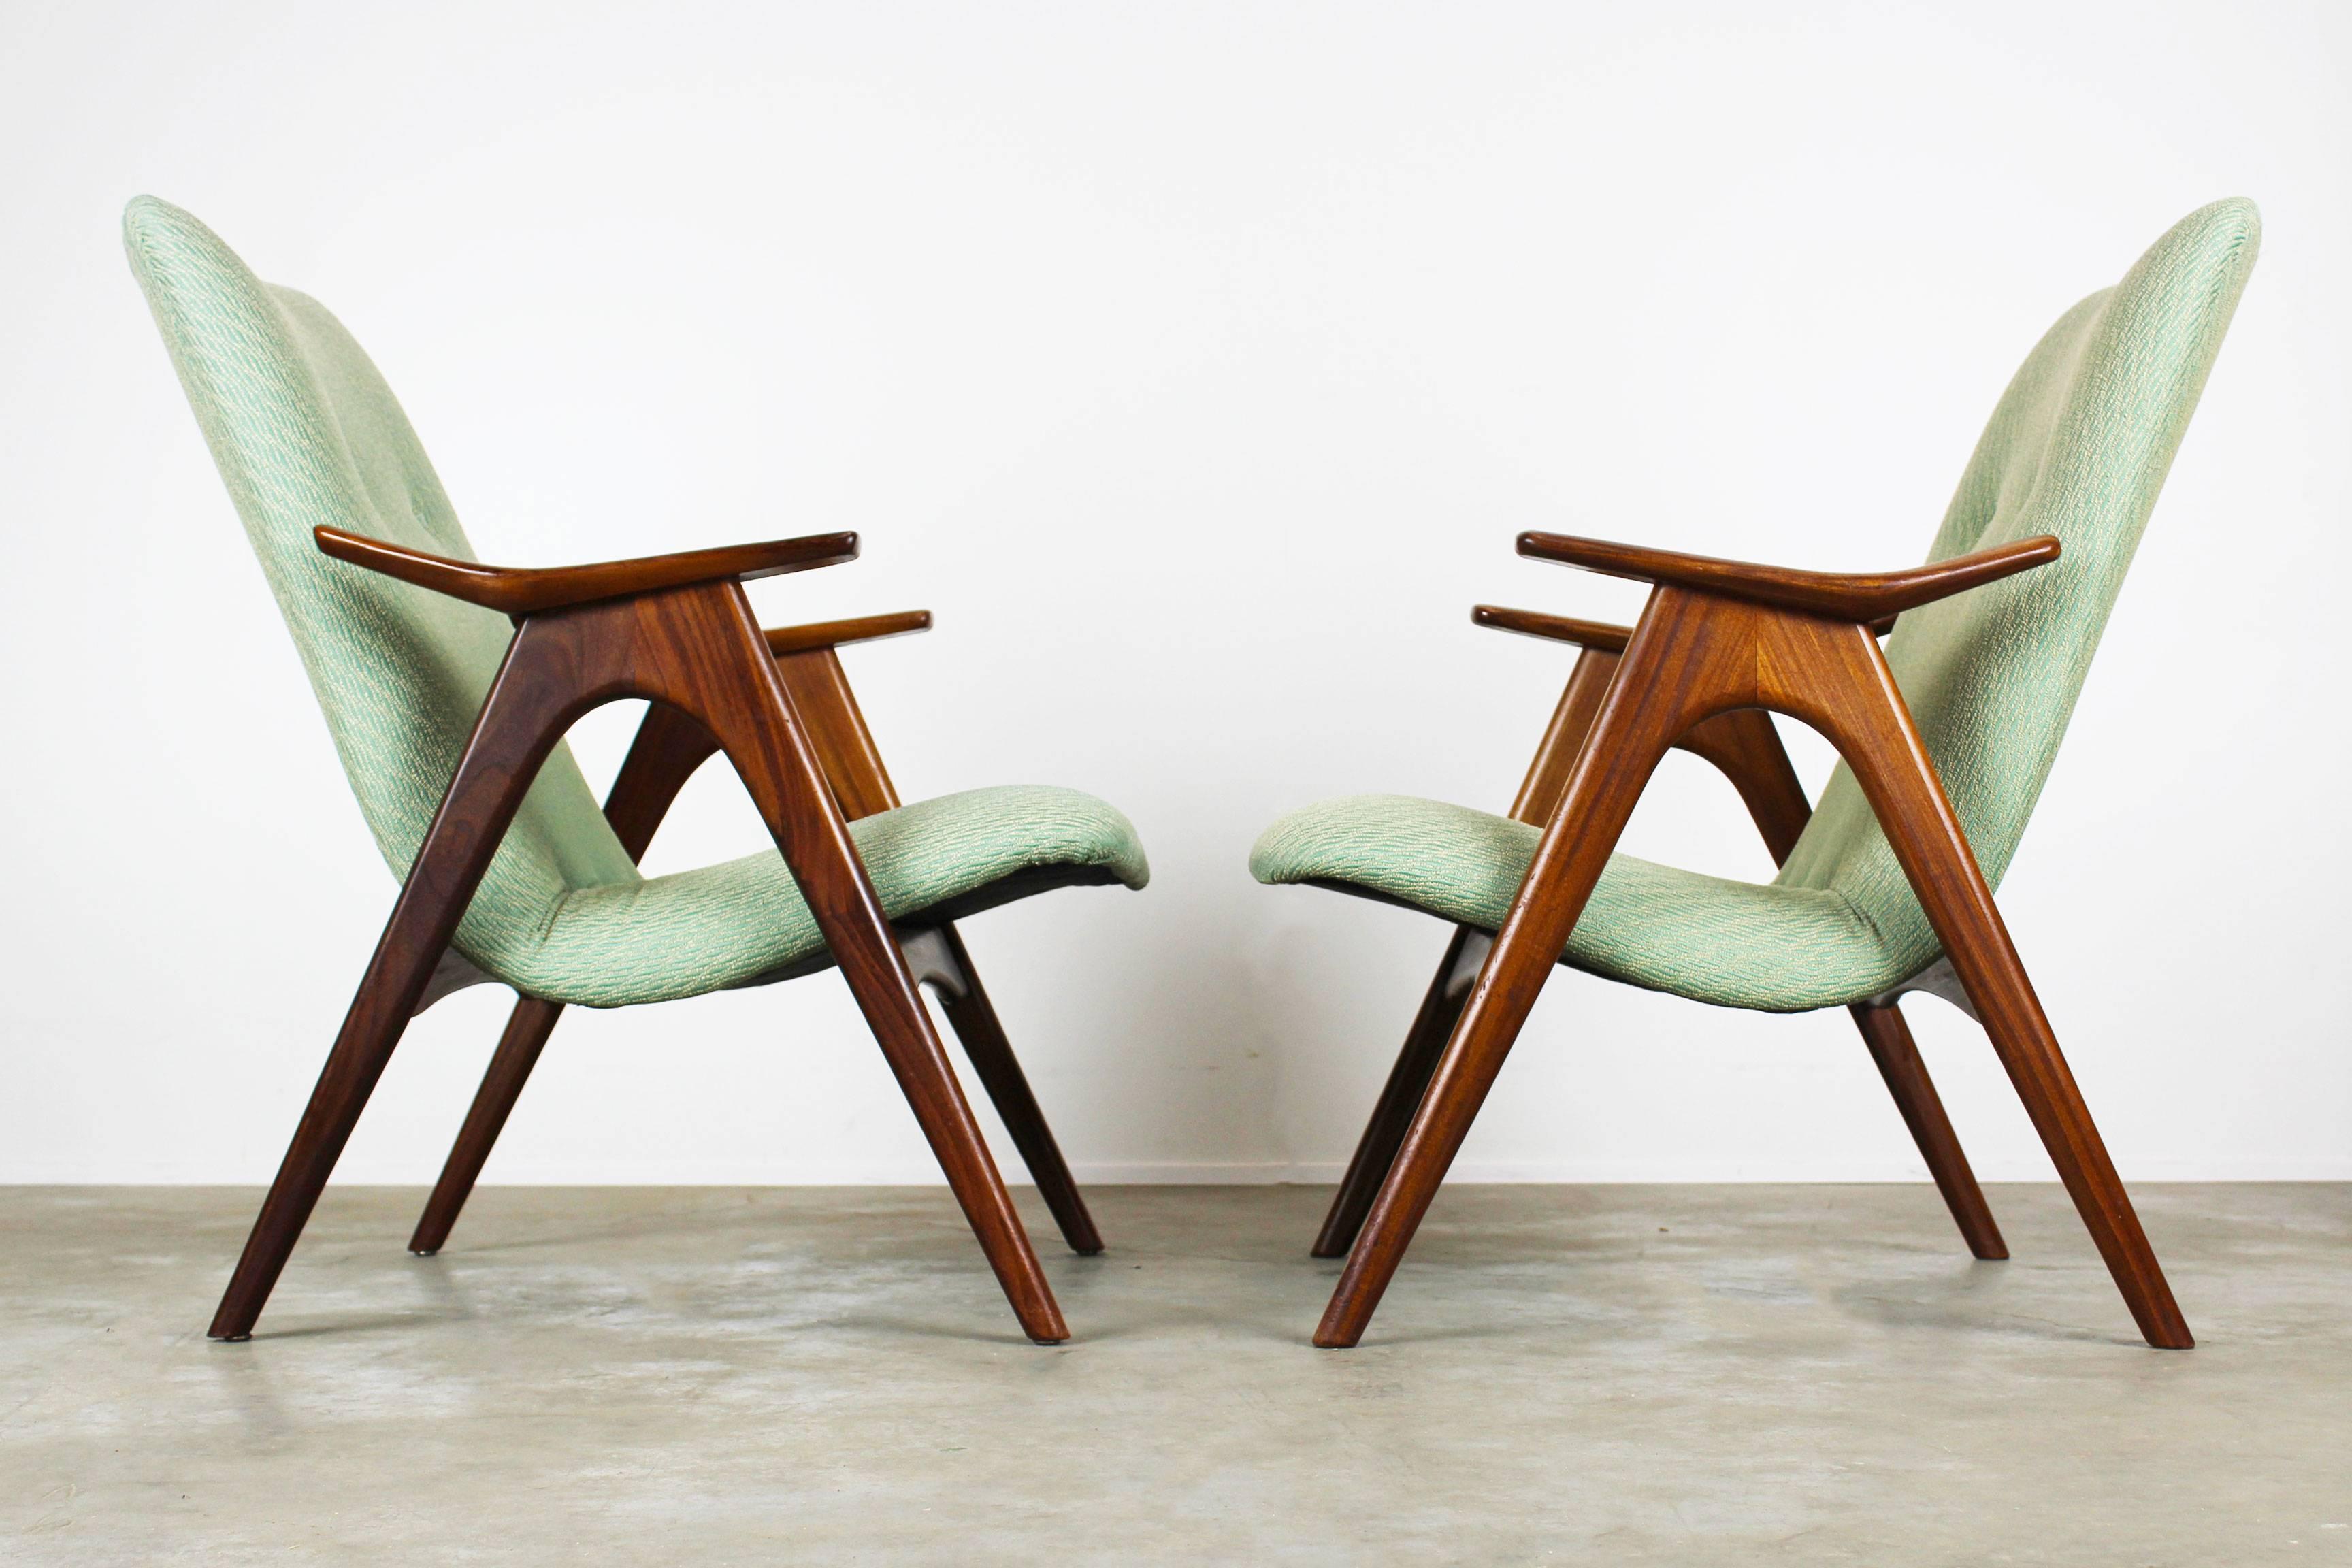 A lovely pair of two Lounge chairs designed by Louis Van Teeffelen for Webe in 1960. The chairs have a stunning organic shaped solid teak frame and have their original 1960 upholstery. Wonderful woven fabric with white trims and mint green. Very